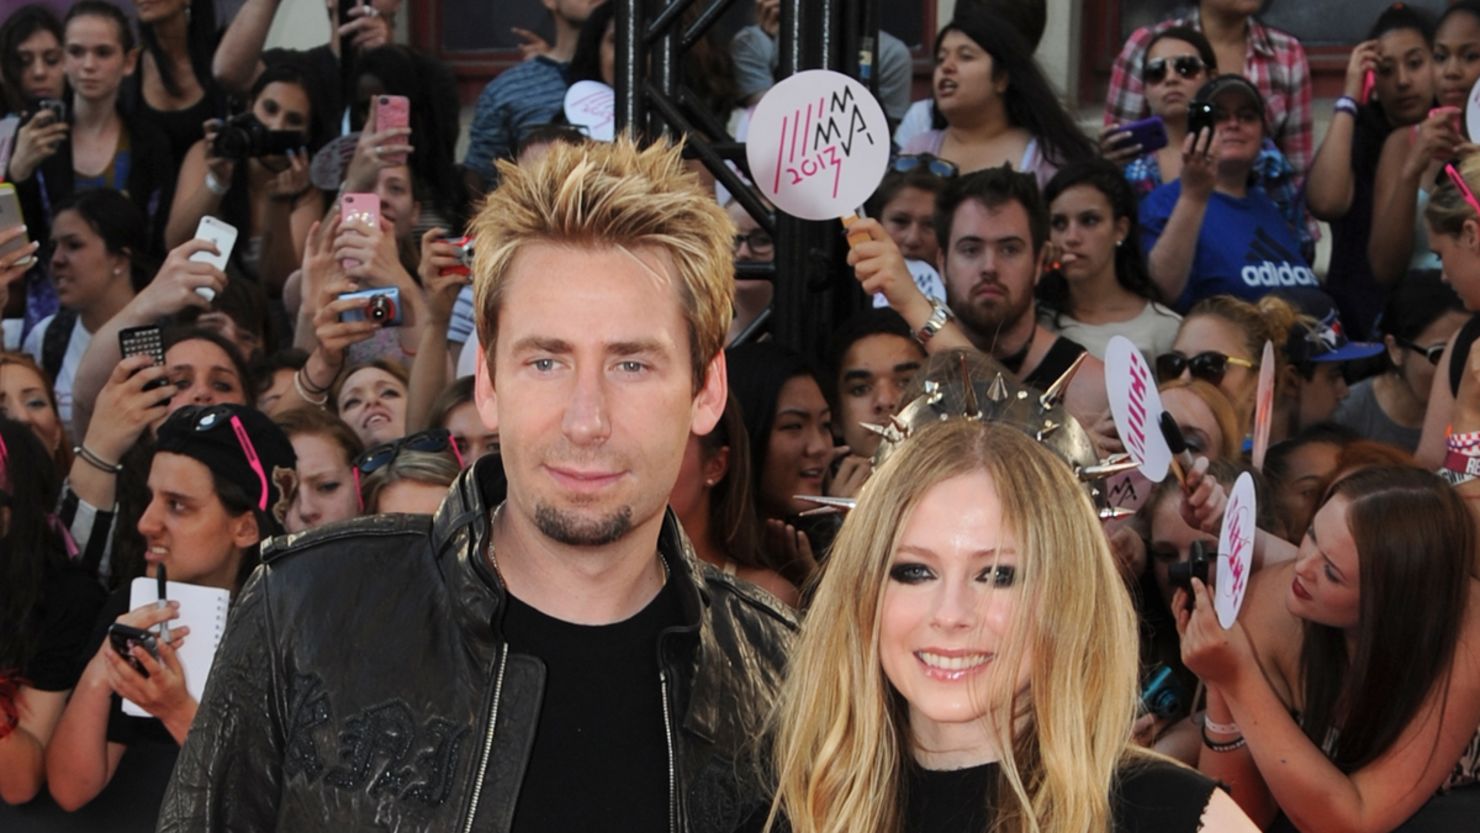 Canadian rockers Chad Kroeger and Avril Lavigne have been married for a year.